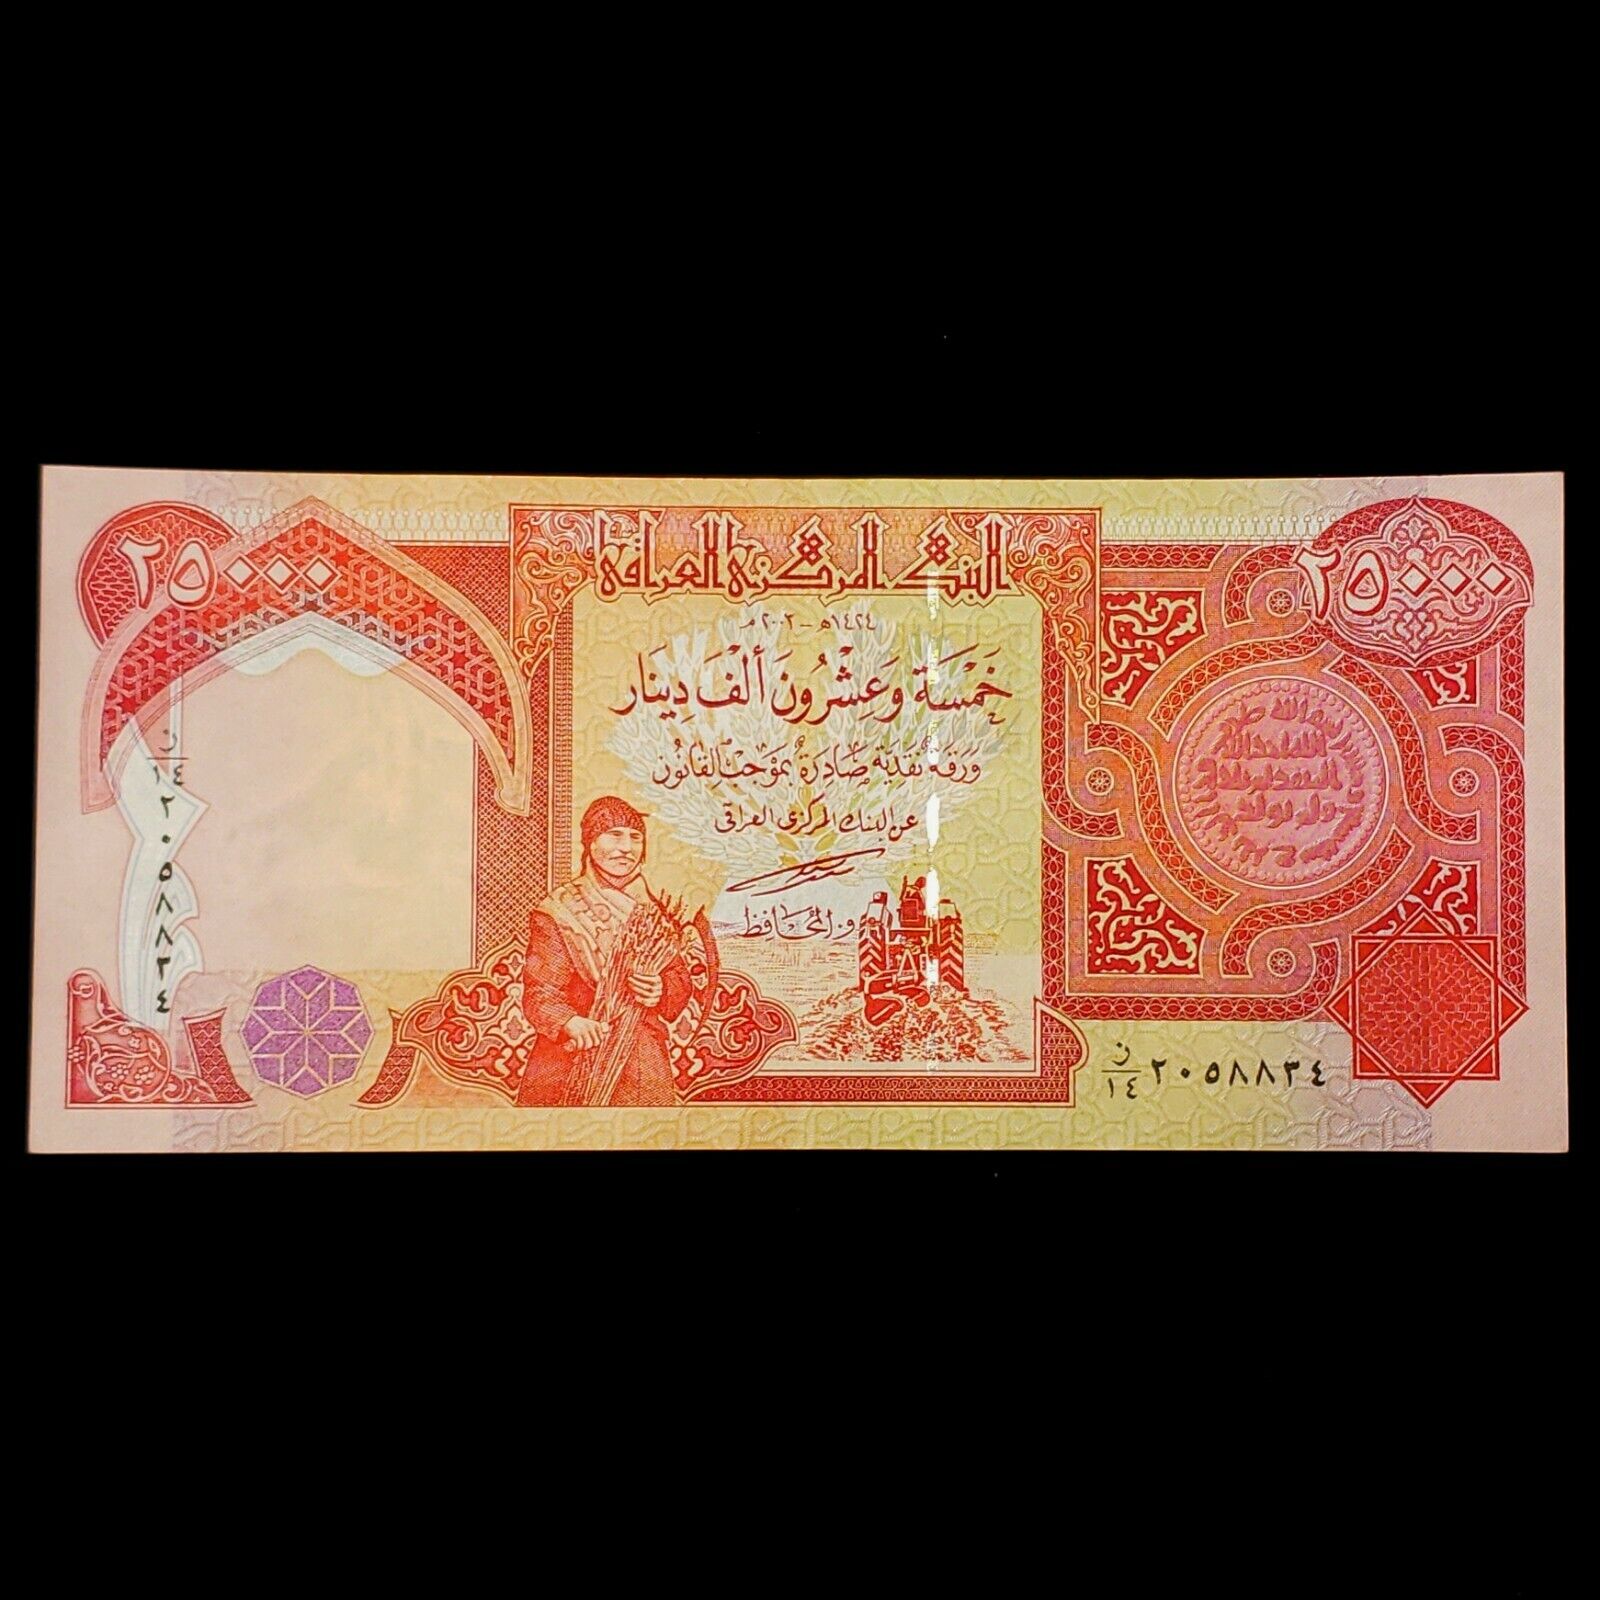 25,000 IRAQI DINAR (1) 25,000 NOTE UNCIRCULATED!! AUTHENTIC! IQD!@ Без бренда